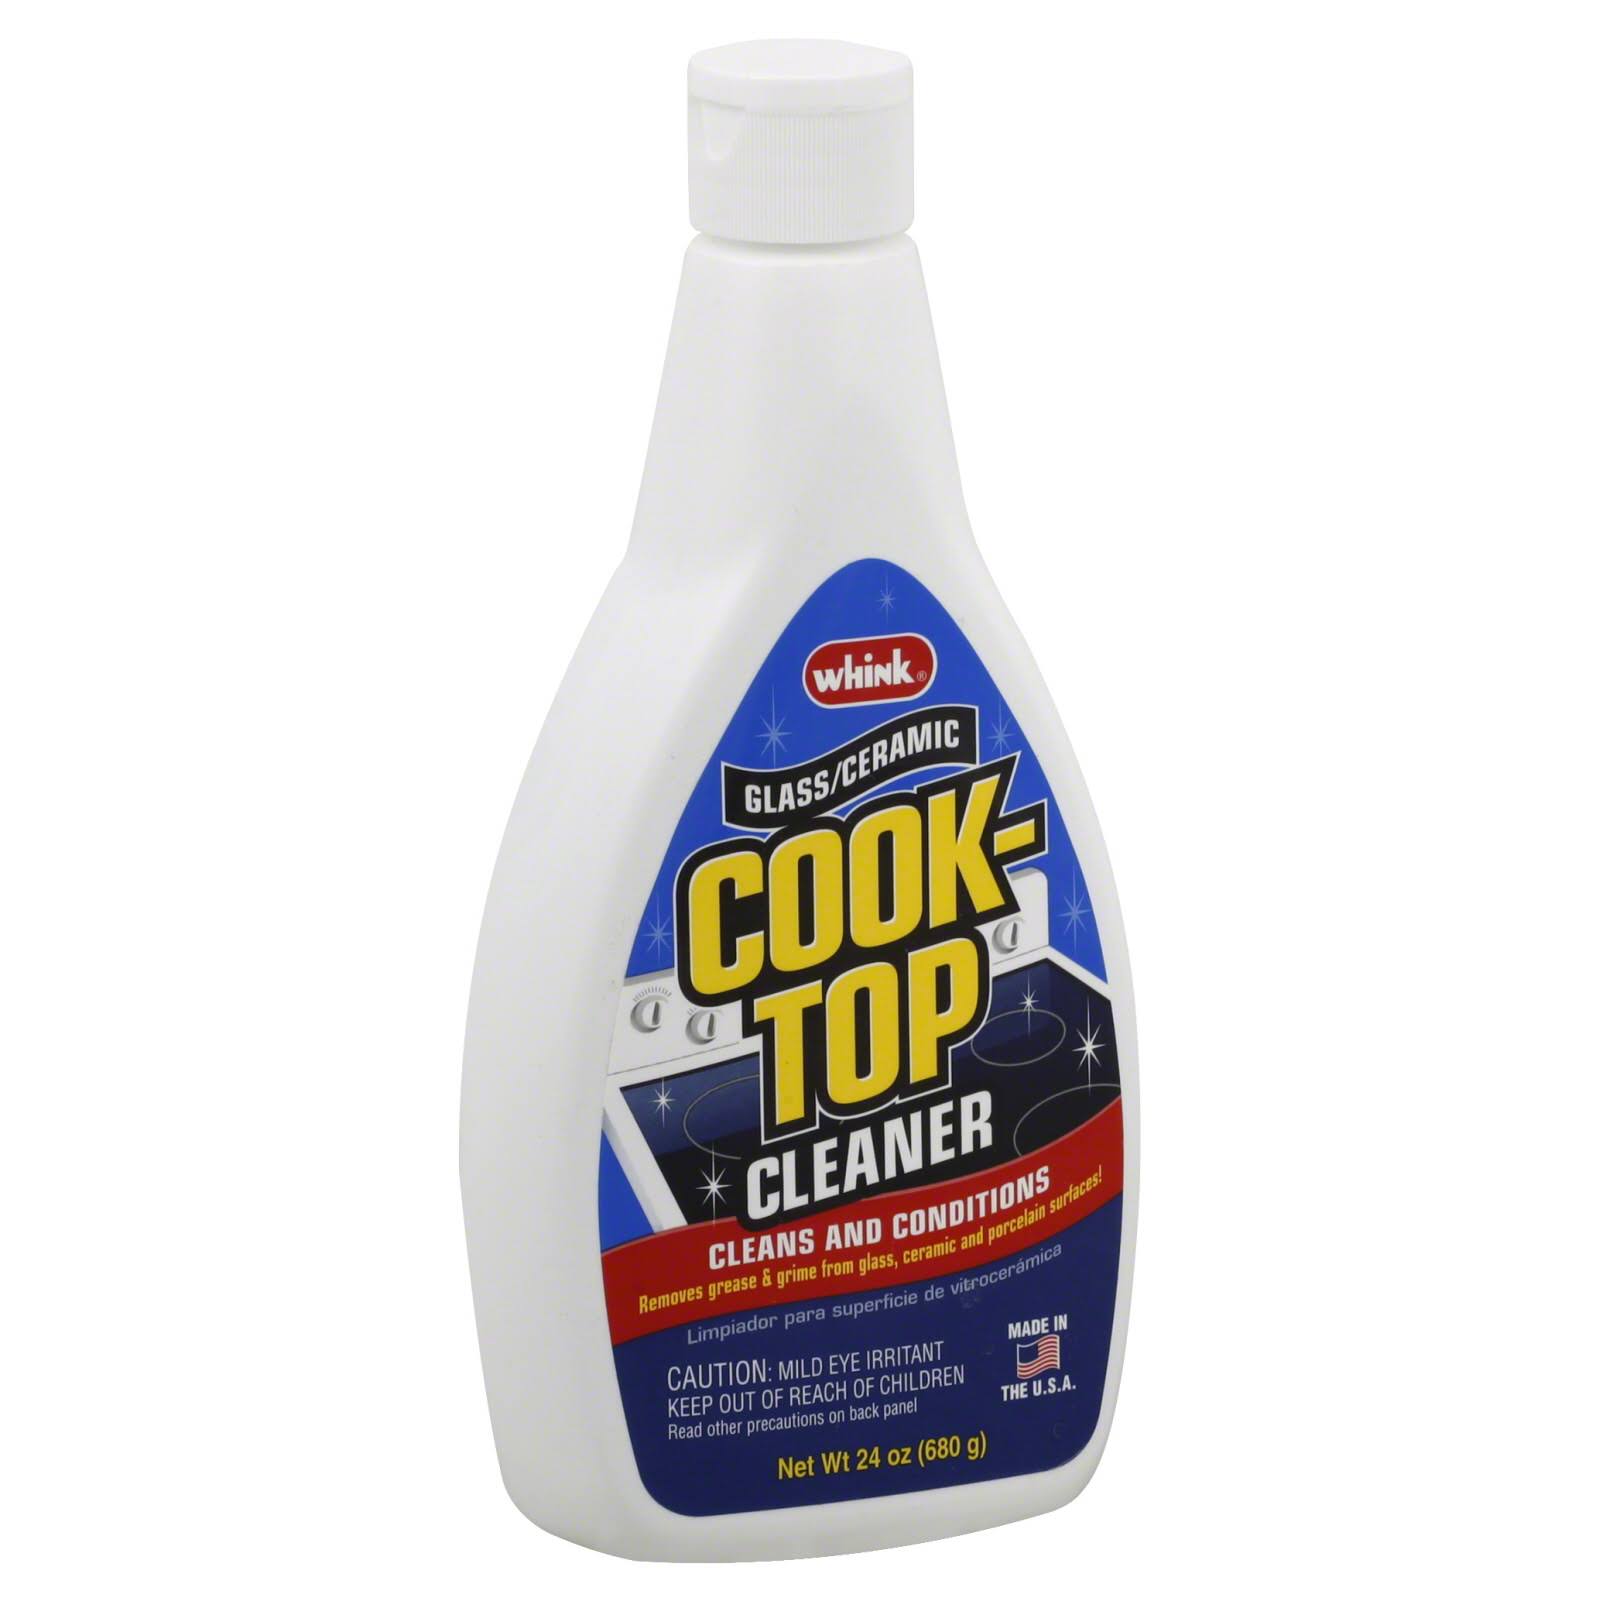 Whink Glass and Ceramic Cook-Top Cleaner - 710ml